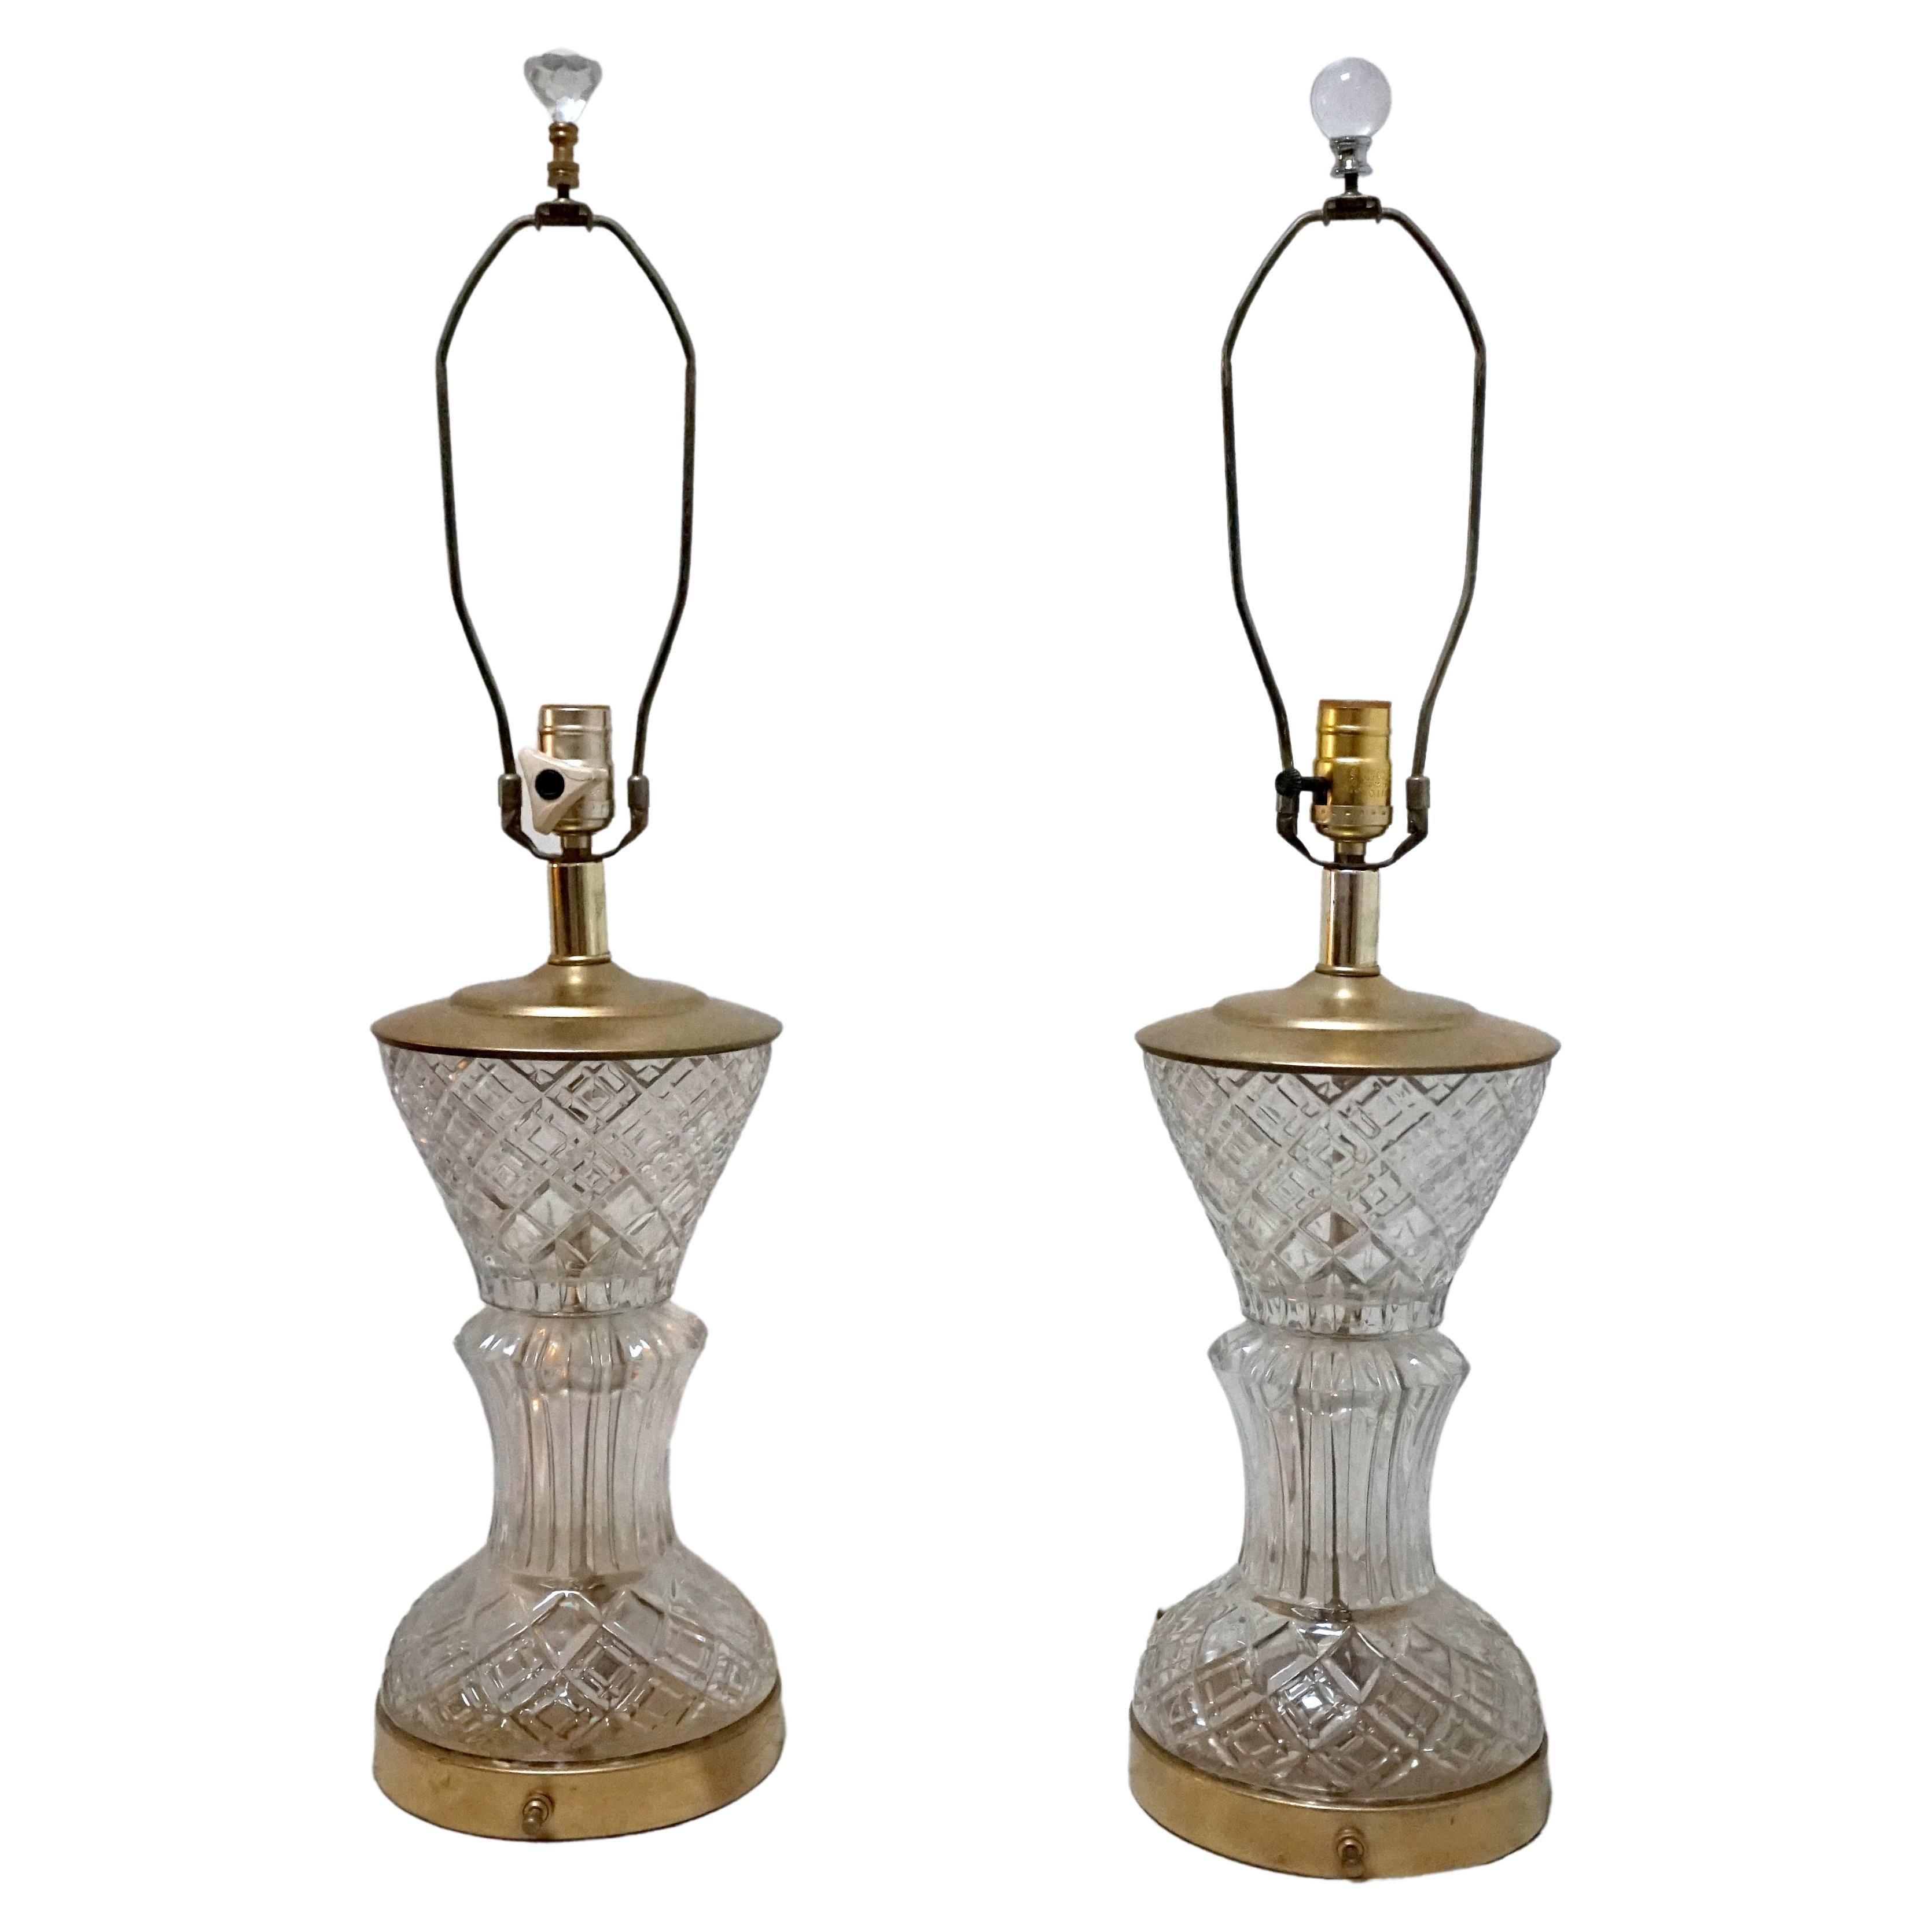 Crystal Art Deco Trumpet Style Pair of Table Lamps circa 1925